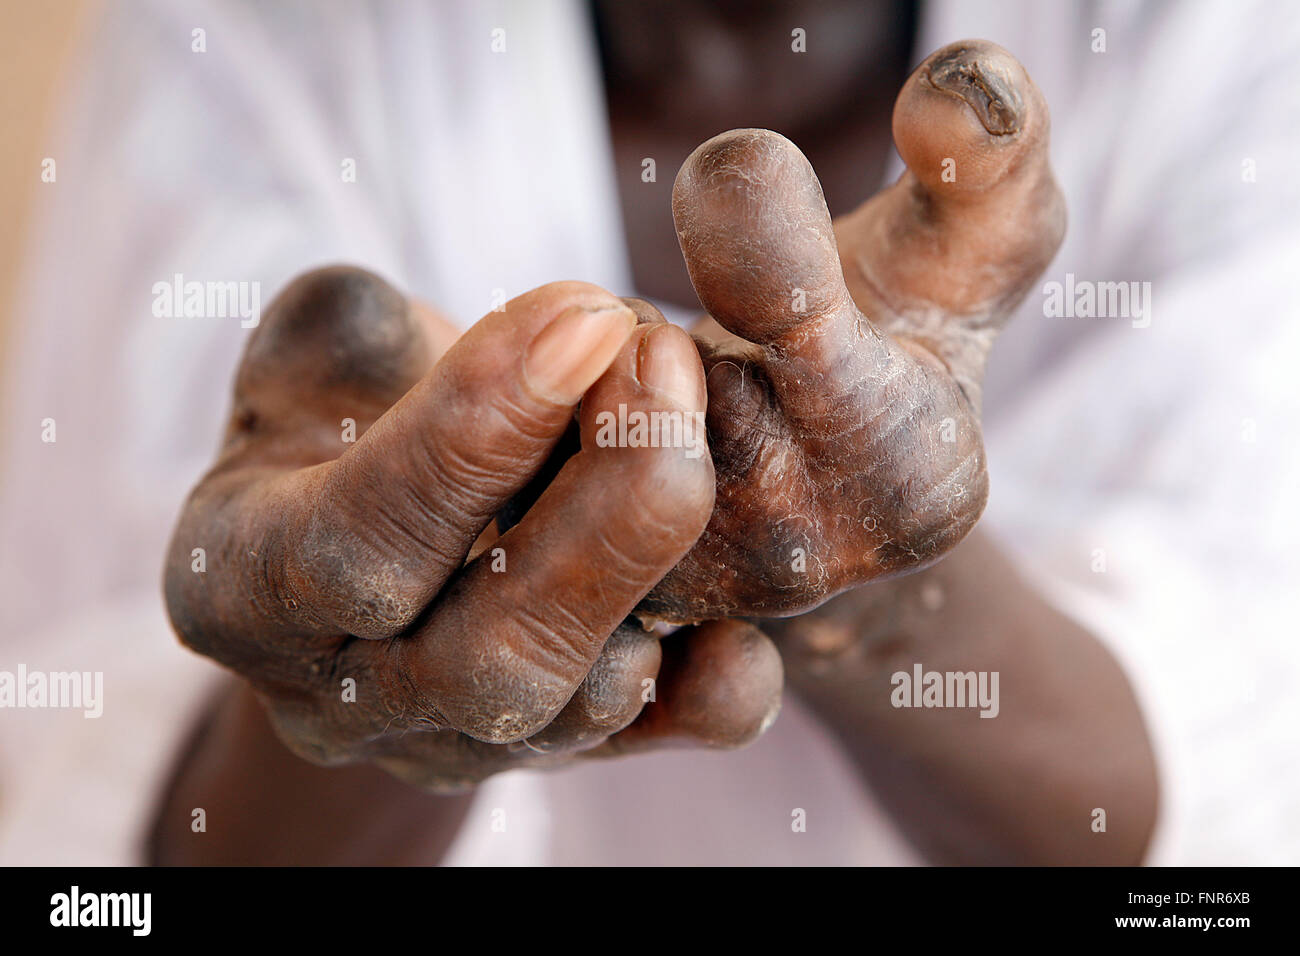 A Leper's badly deformed hands-Leprosy is a chronic inflammatory disease. Stock Photo